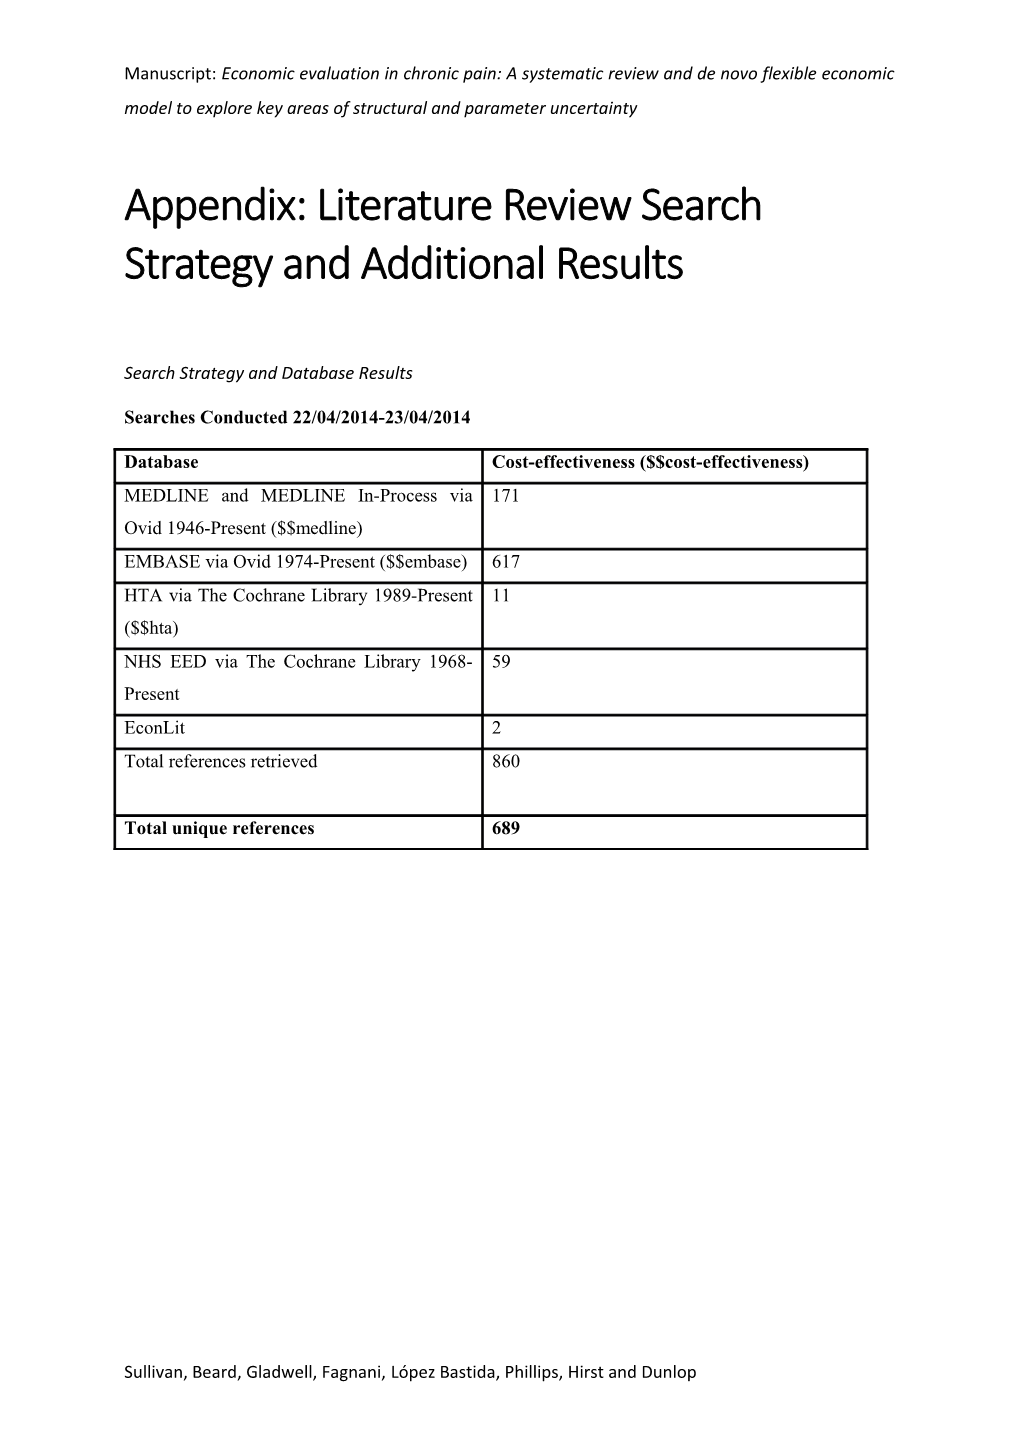 Appendix: Literature Review Search Strategy and Additional Results